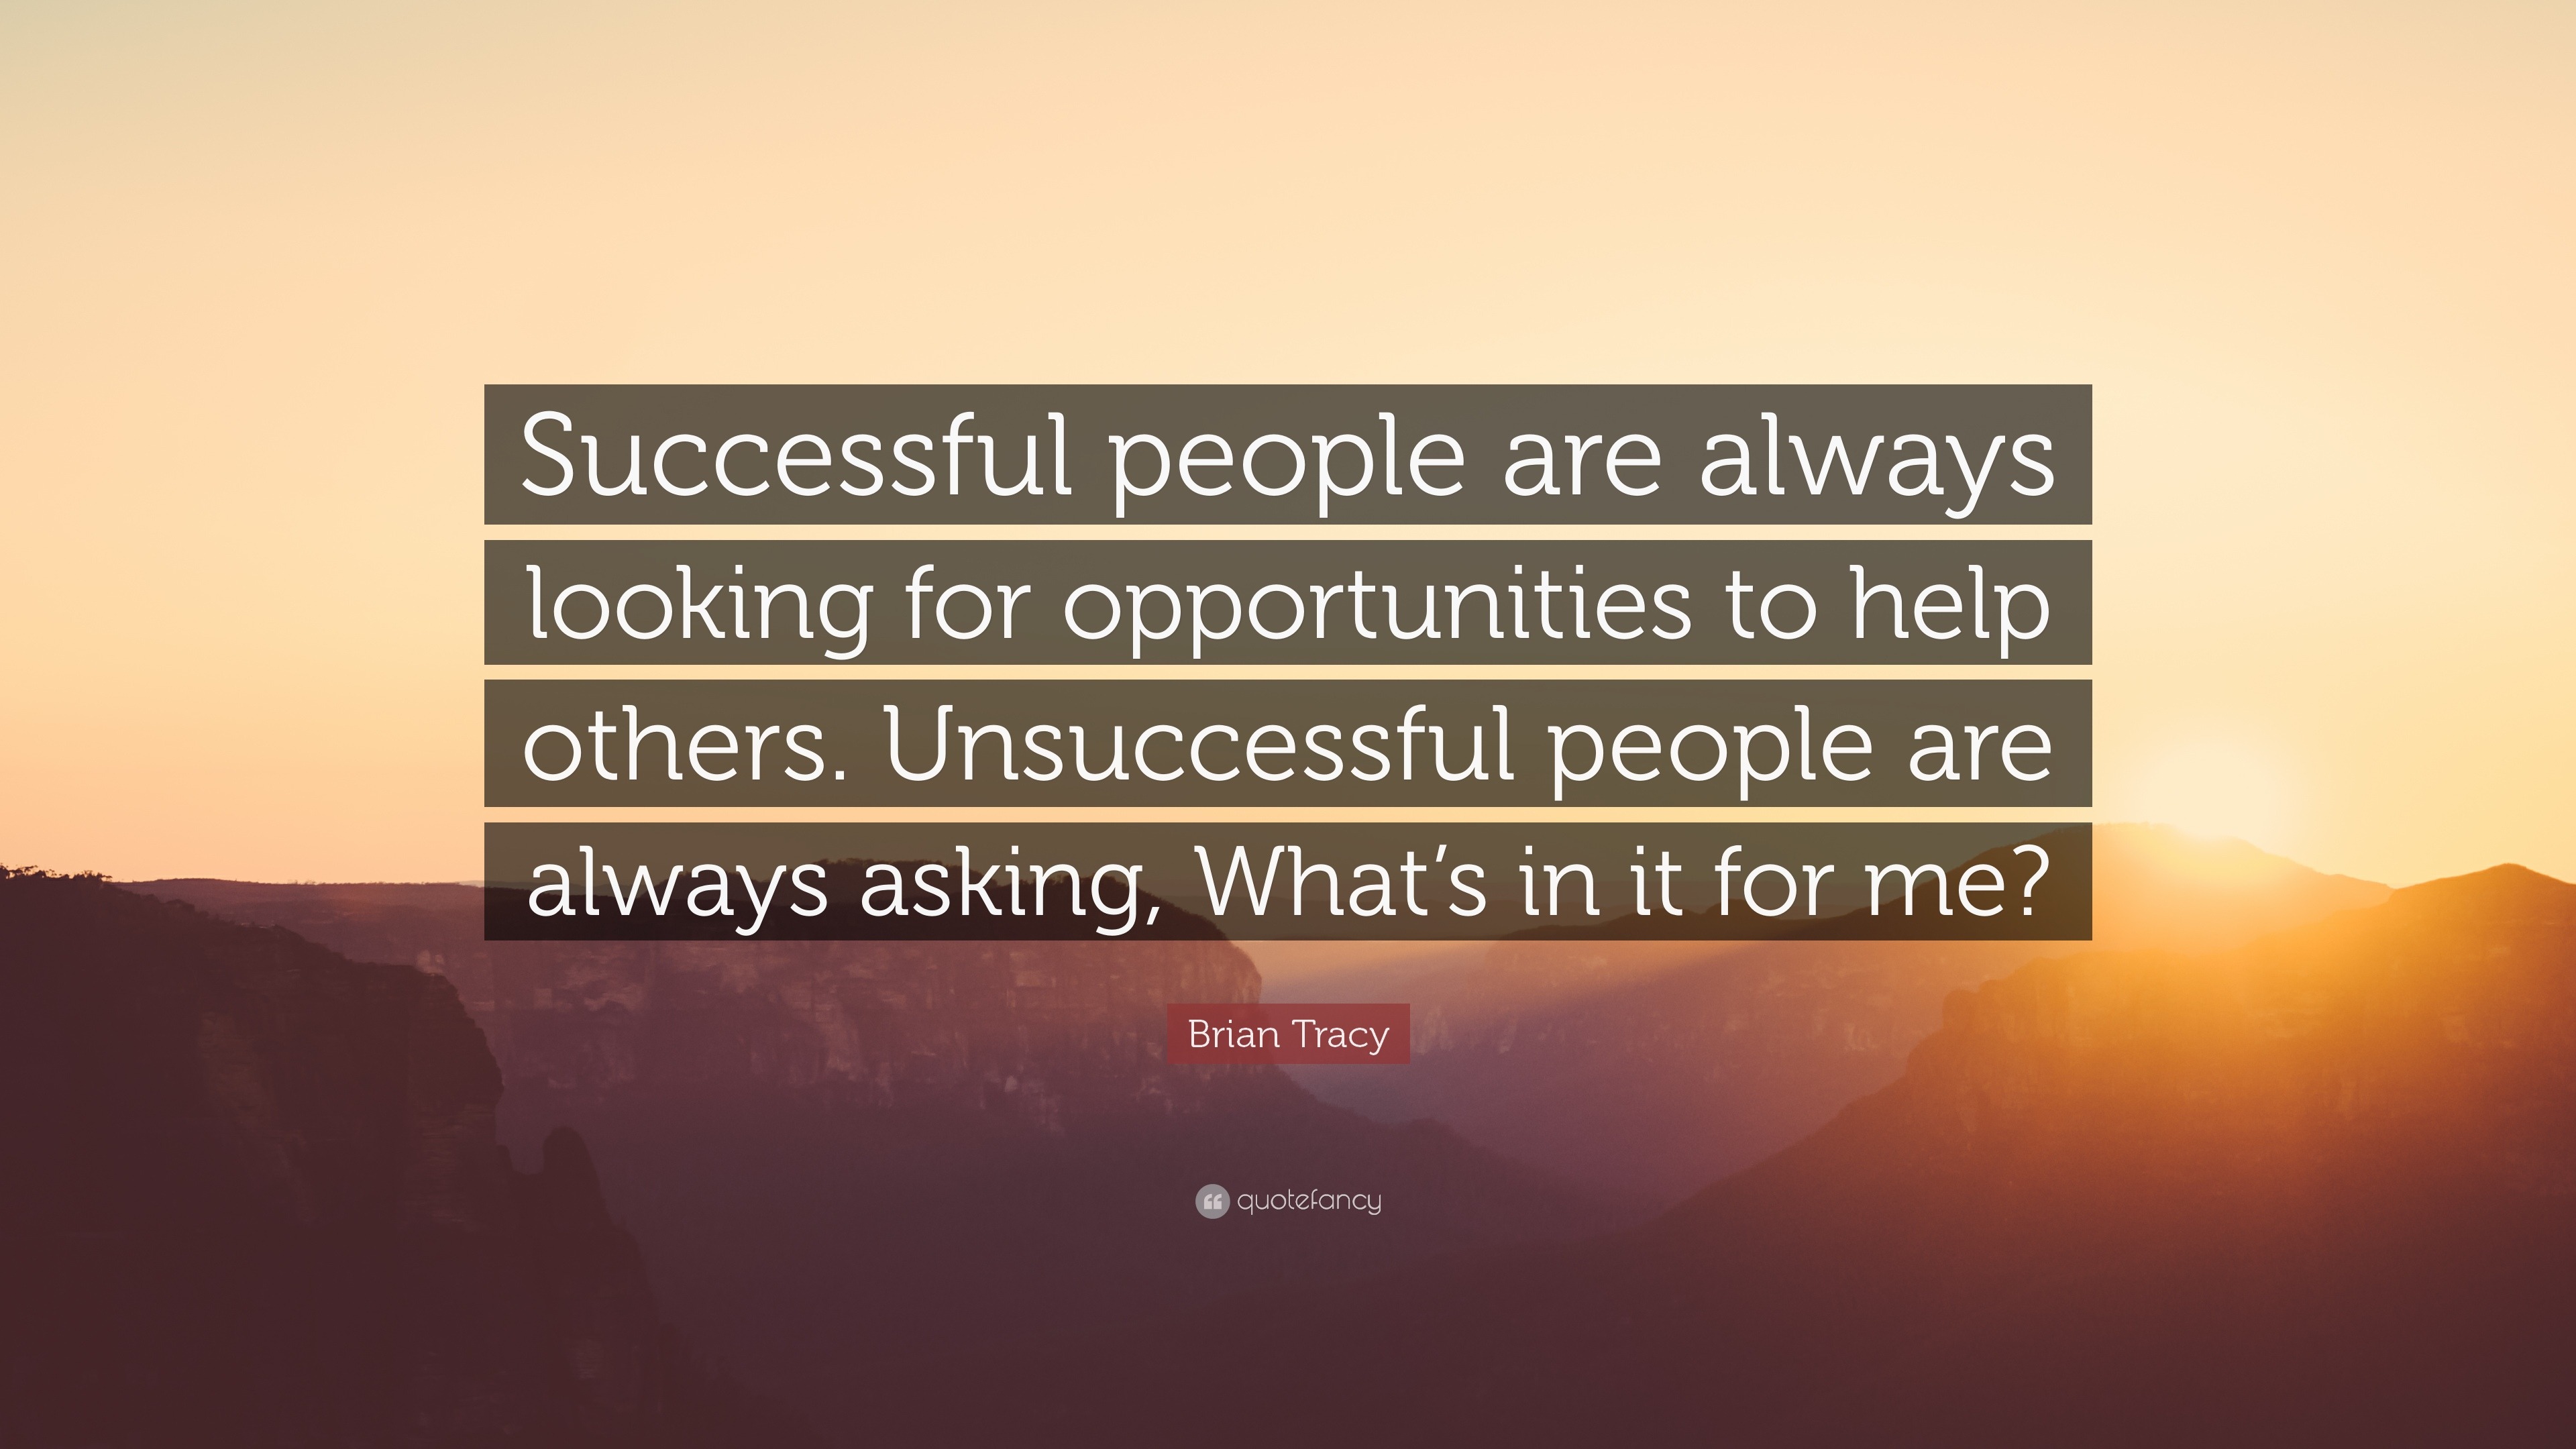 Brian Tracy Quote: “Successful People Are Always Looking For Opportunities To Help Others. Unsuccessful People Are Always Asking, What's In...”